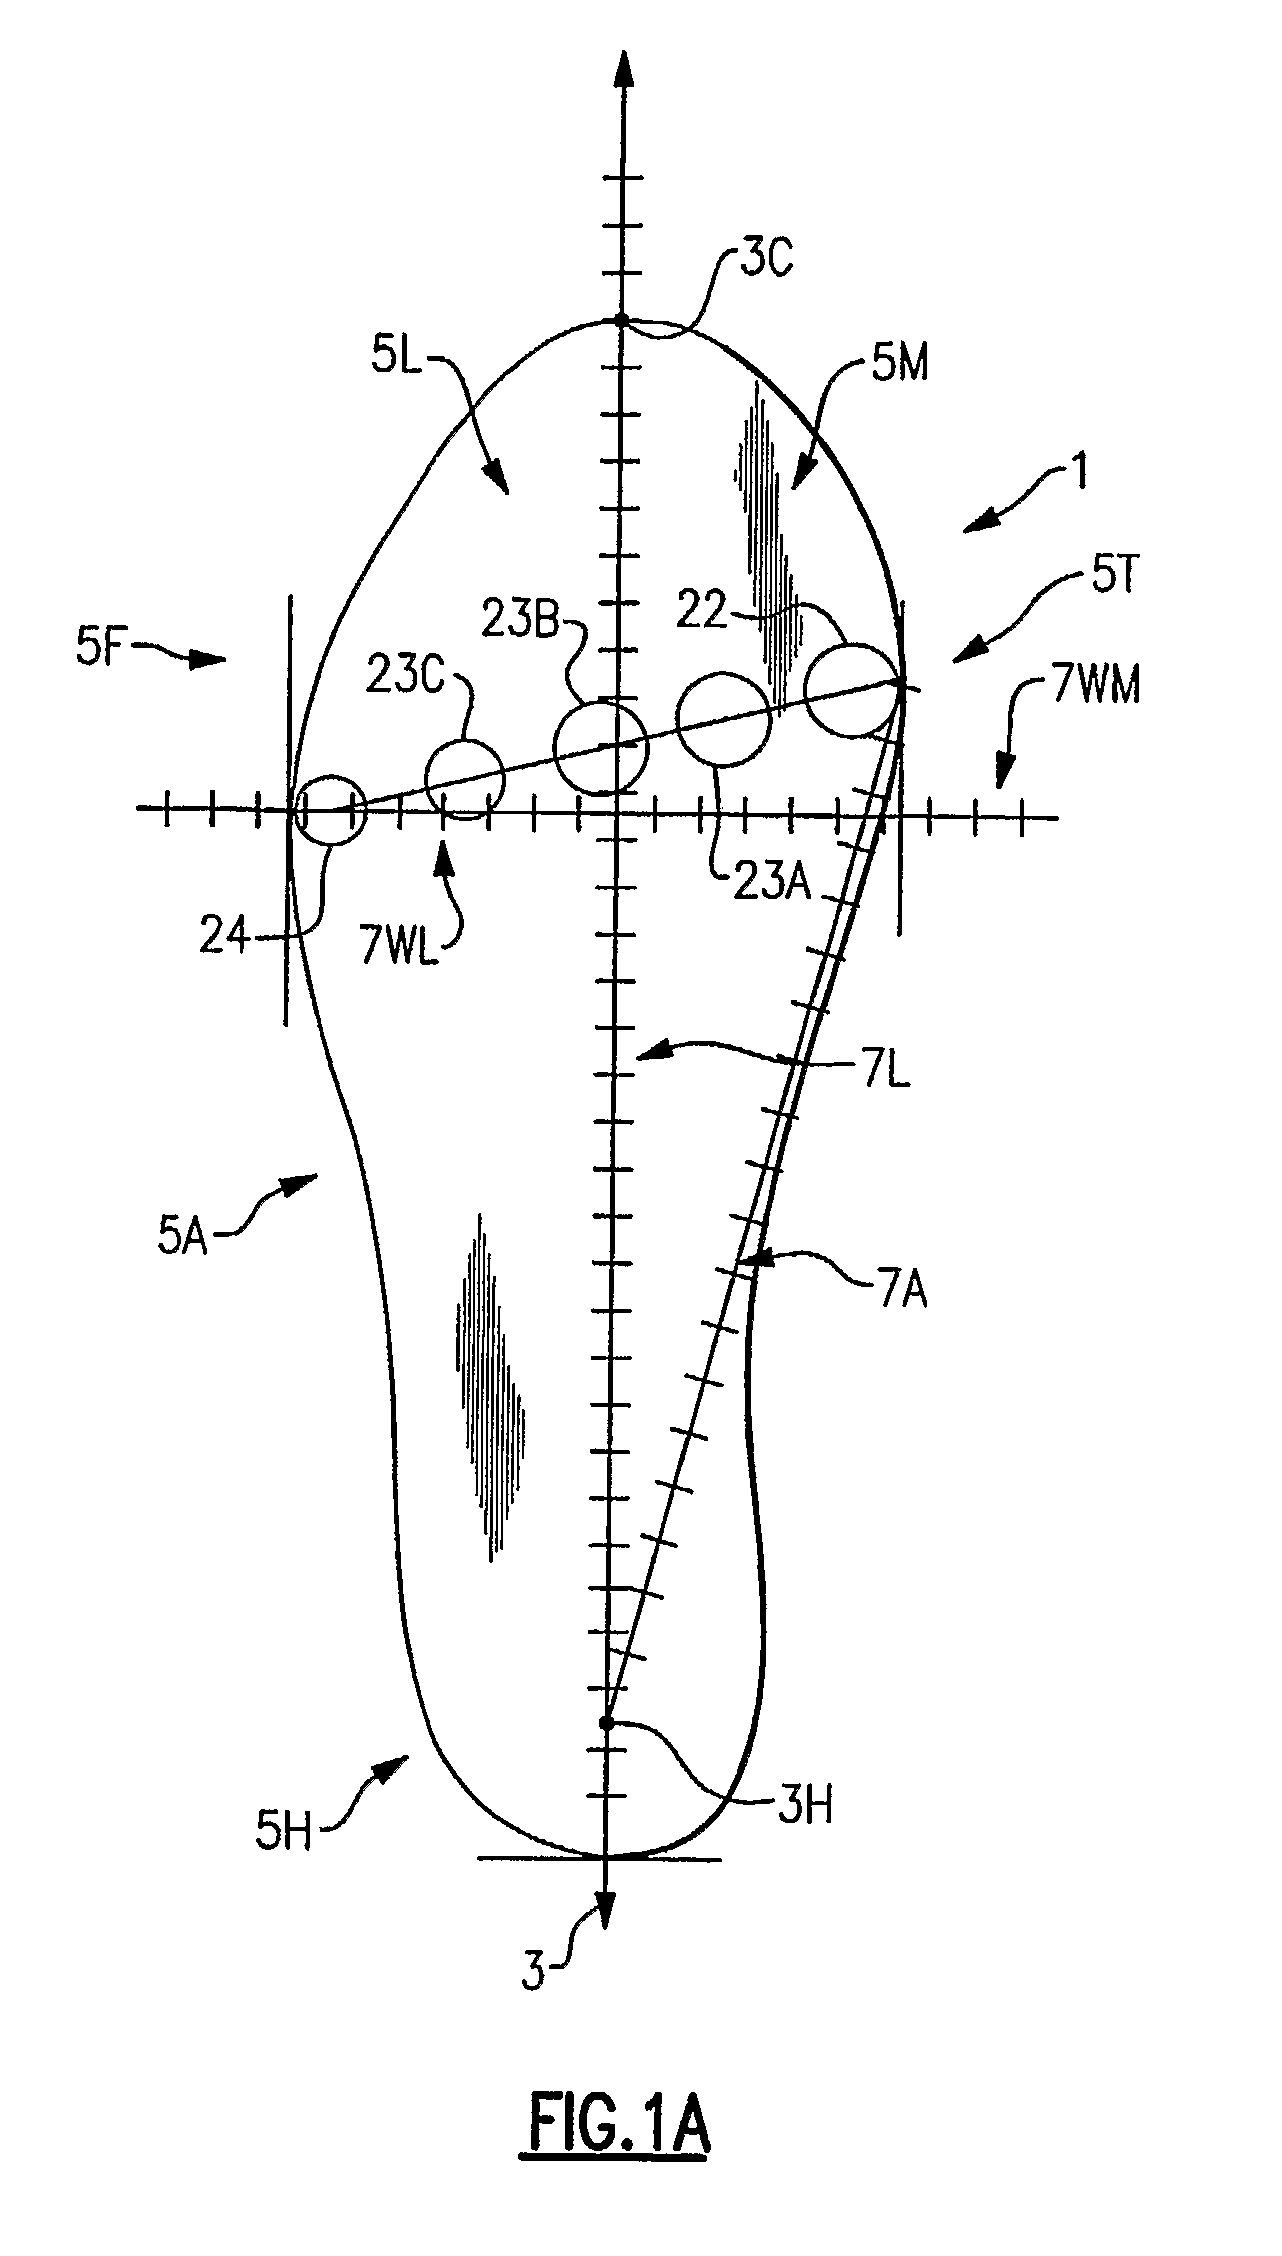 Foot measurement, alignment and evaluation device